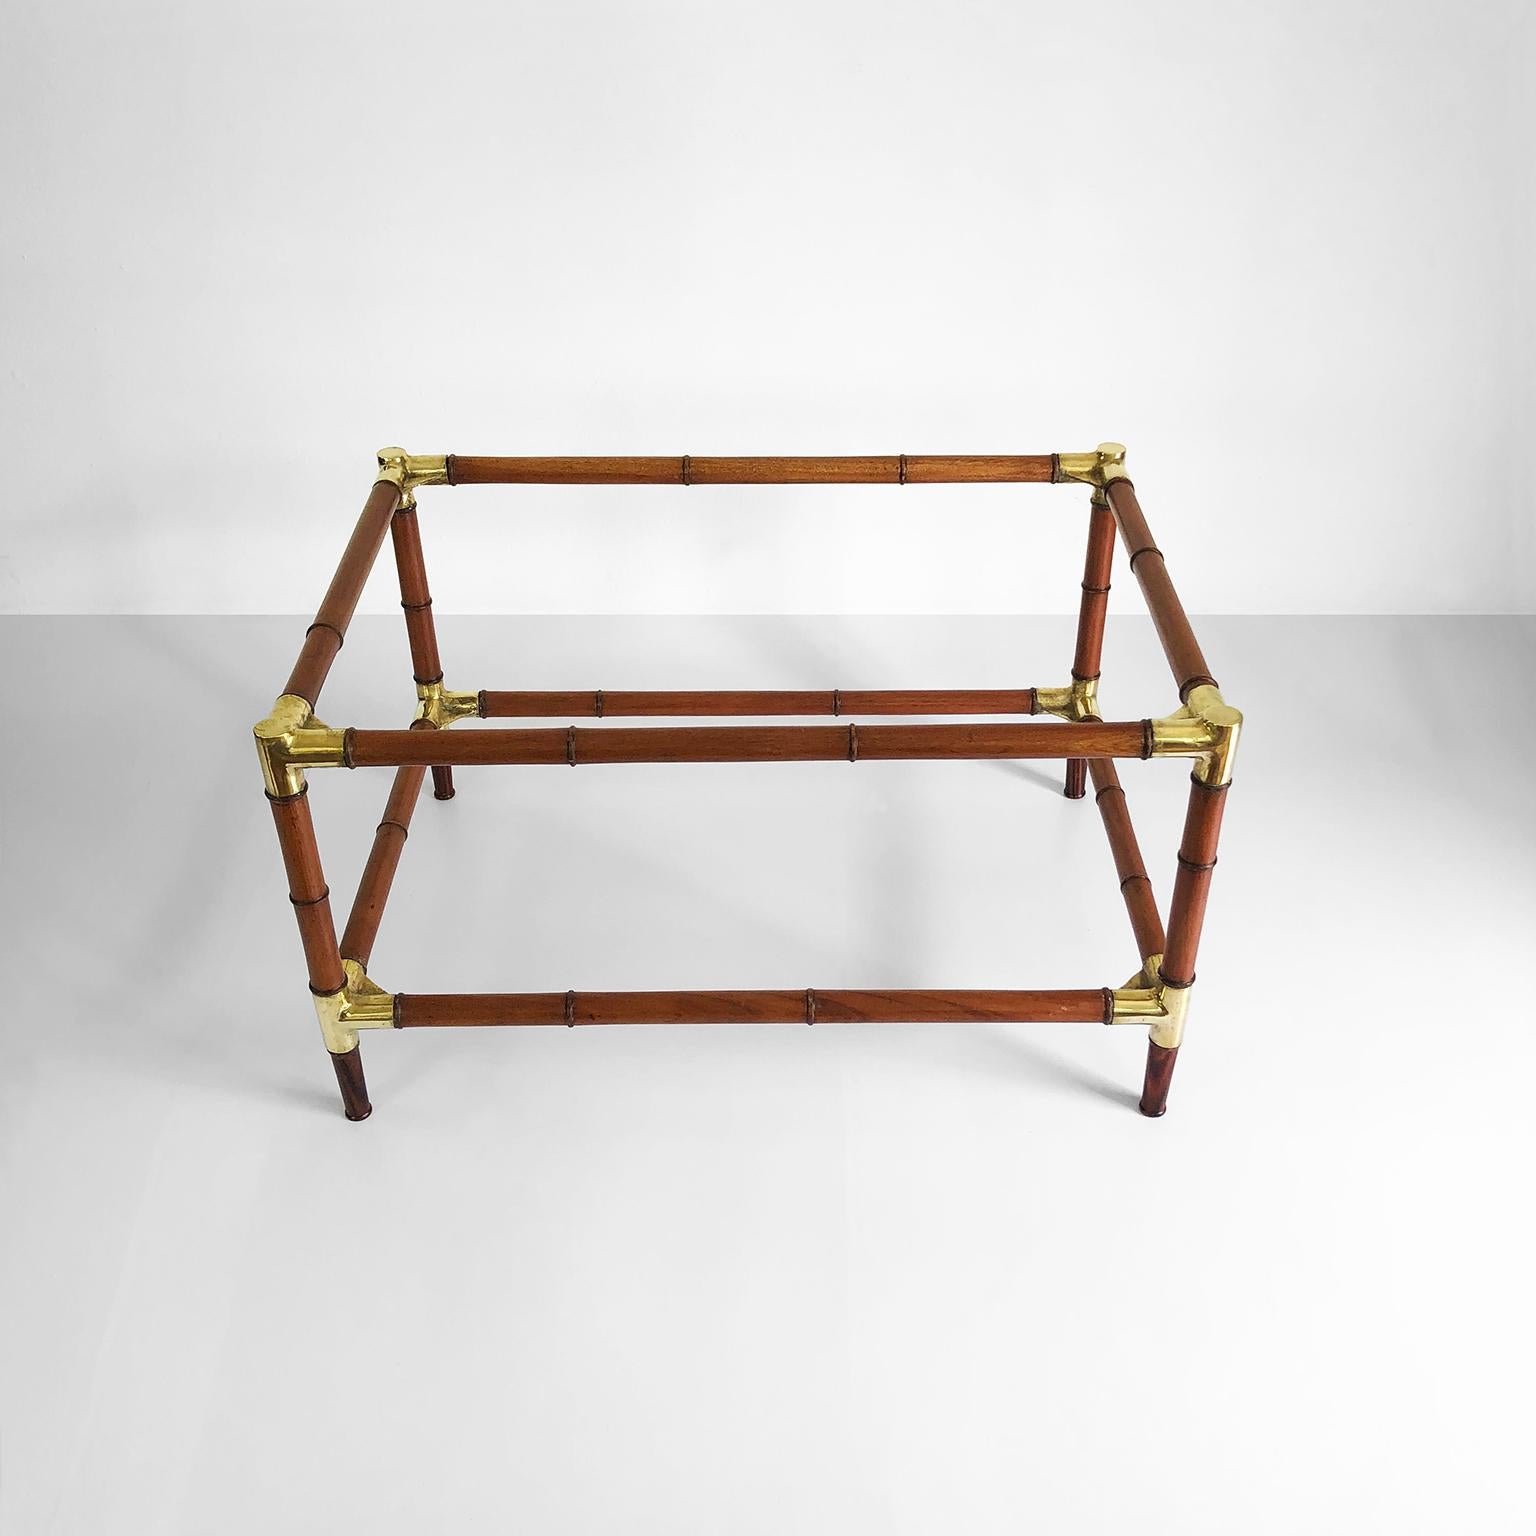 Circa 1960, we offer this, midcentury bamboo and brass Mexican coffee table with two crystal shelves, made in two precious kind of woods mahogany and cocobolo.

Note: The table not include glass cover for better shipping.